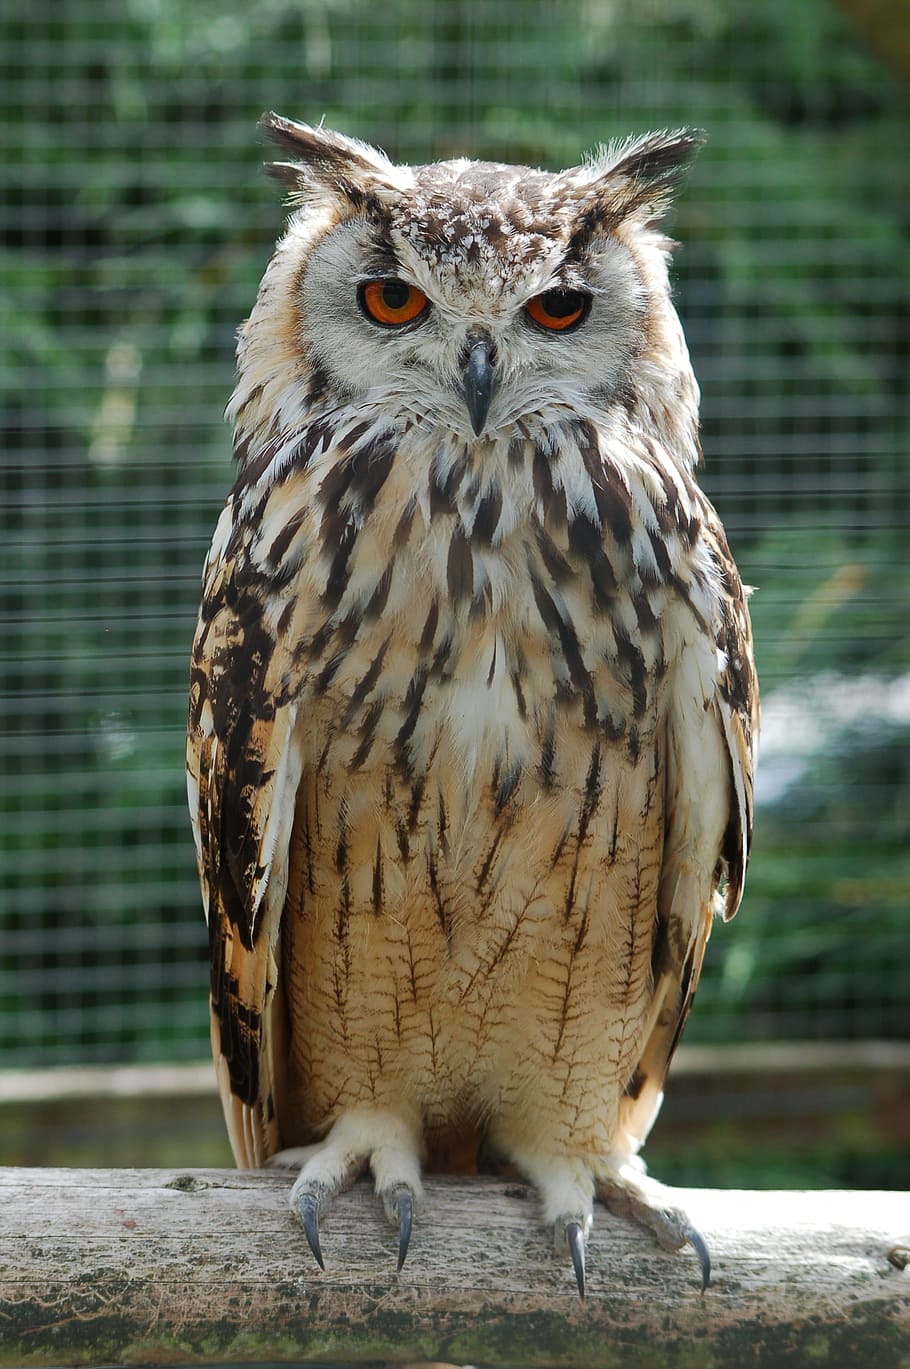 white, brown, owl, branch, Eagle Owl, Bird Of Prey, bengalese eagle owl, bird, sitting, perched